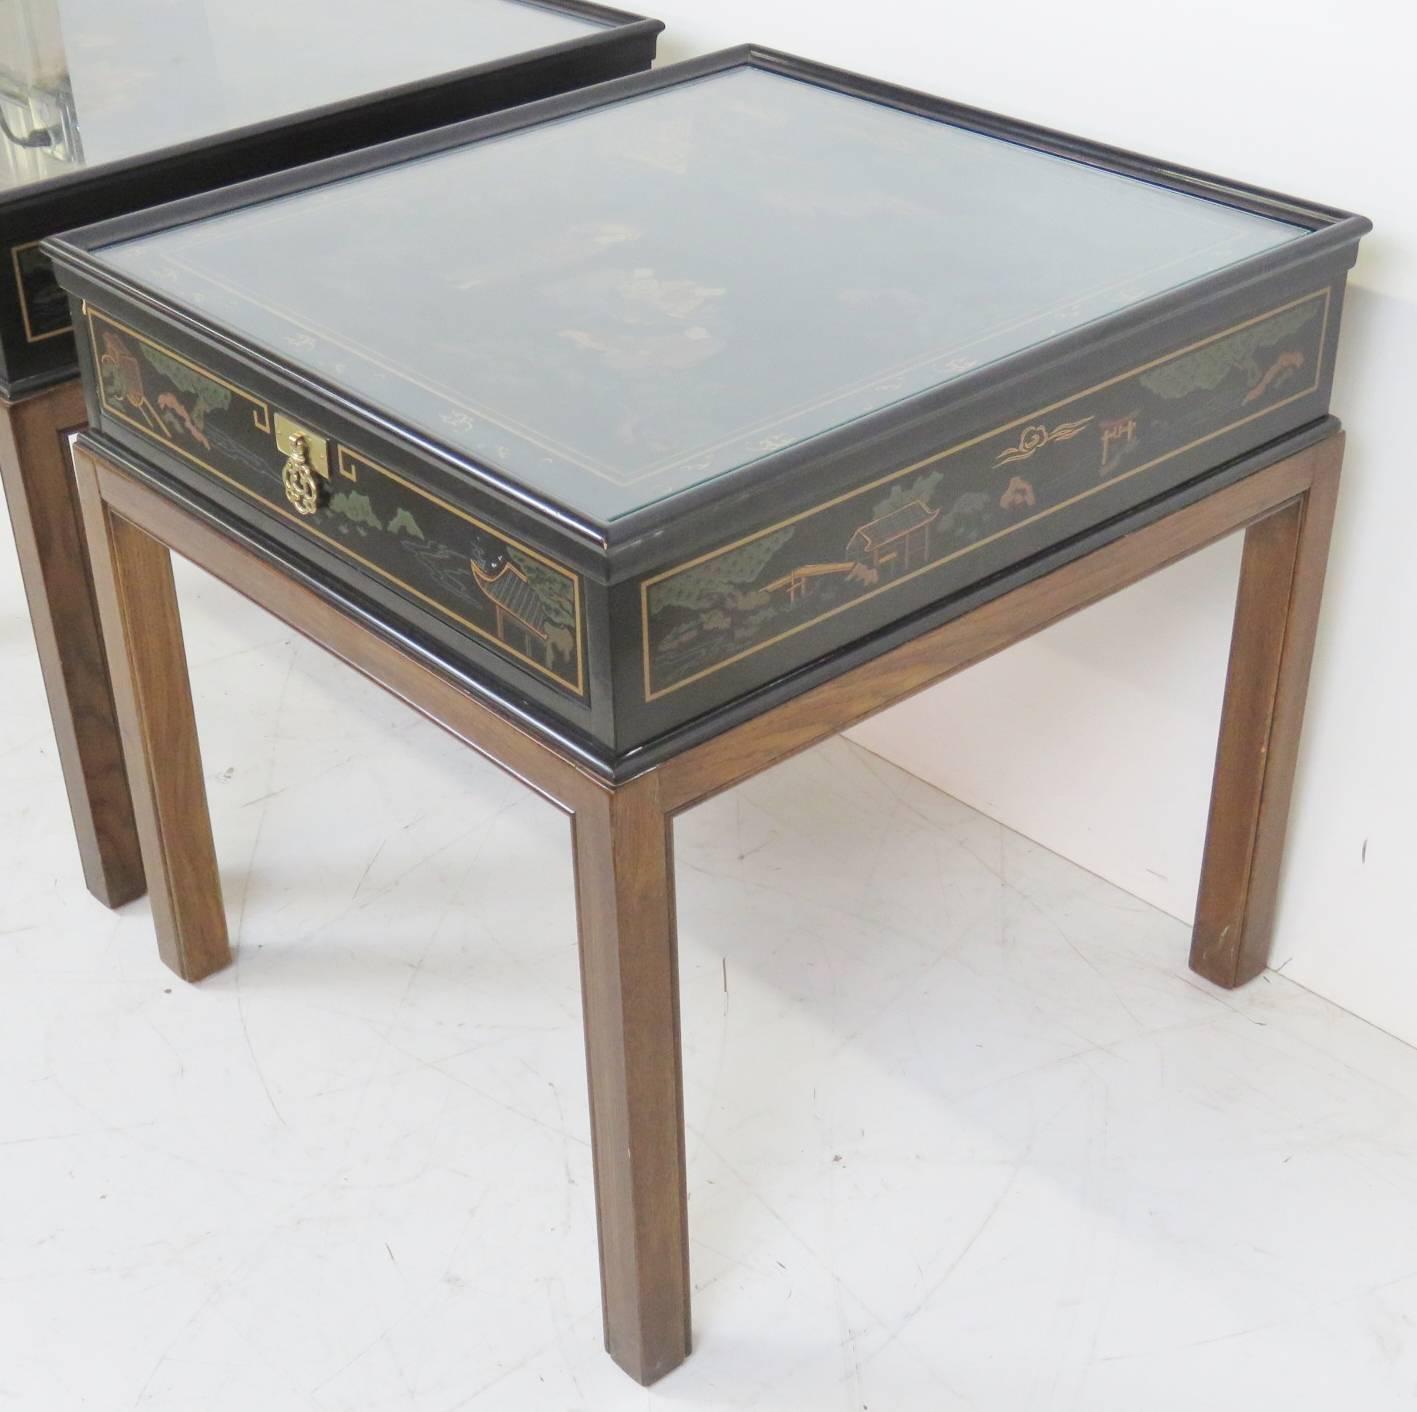 Black lacquered finish with chinoiserie paint decoration and glass tops.